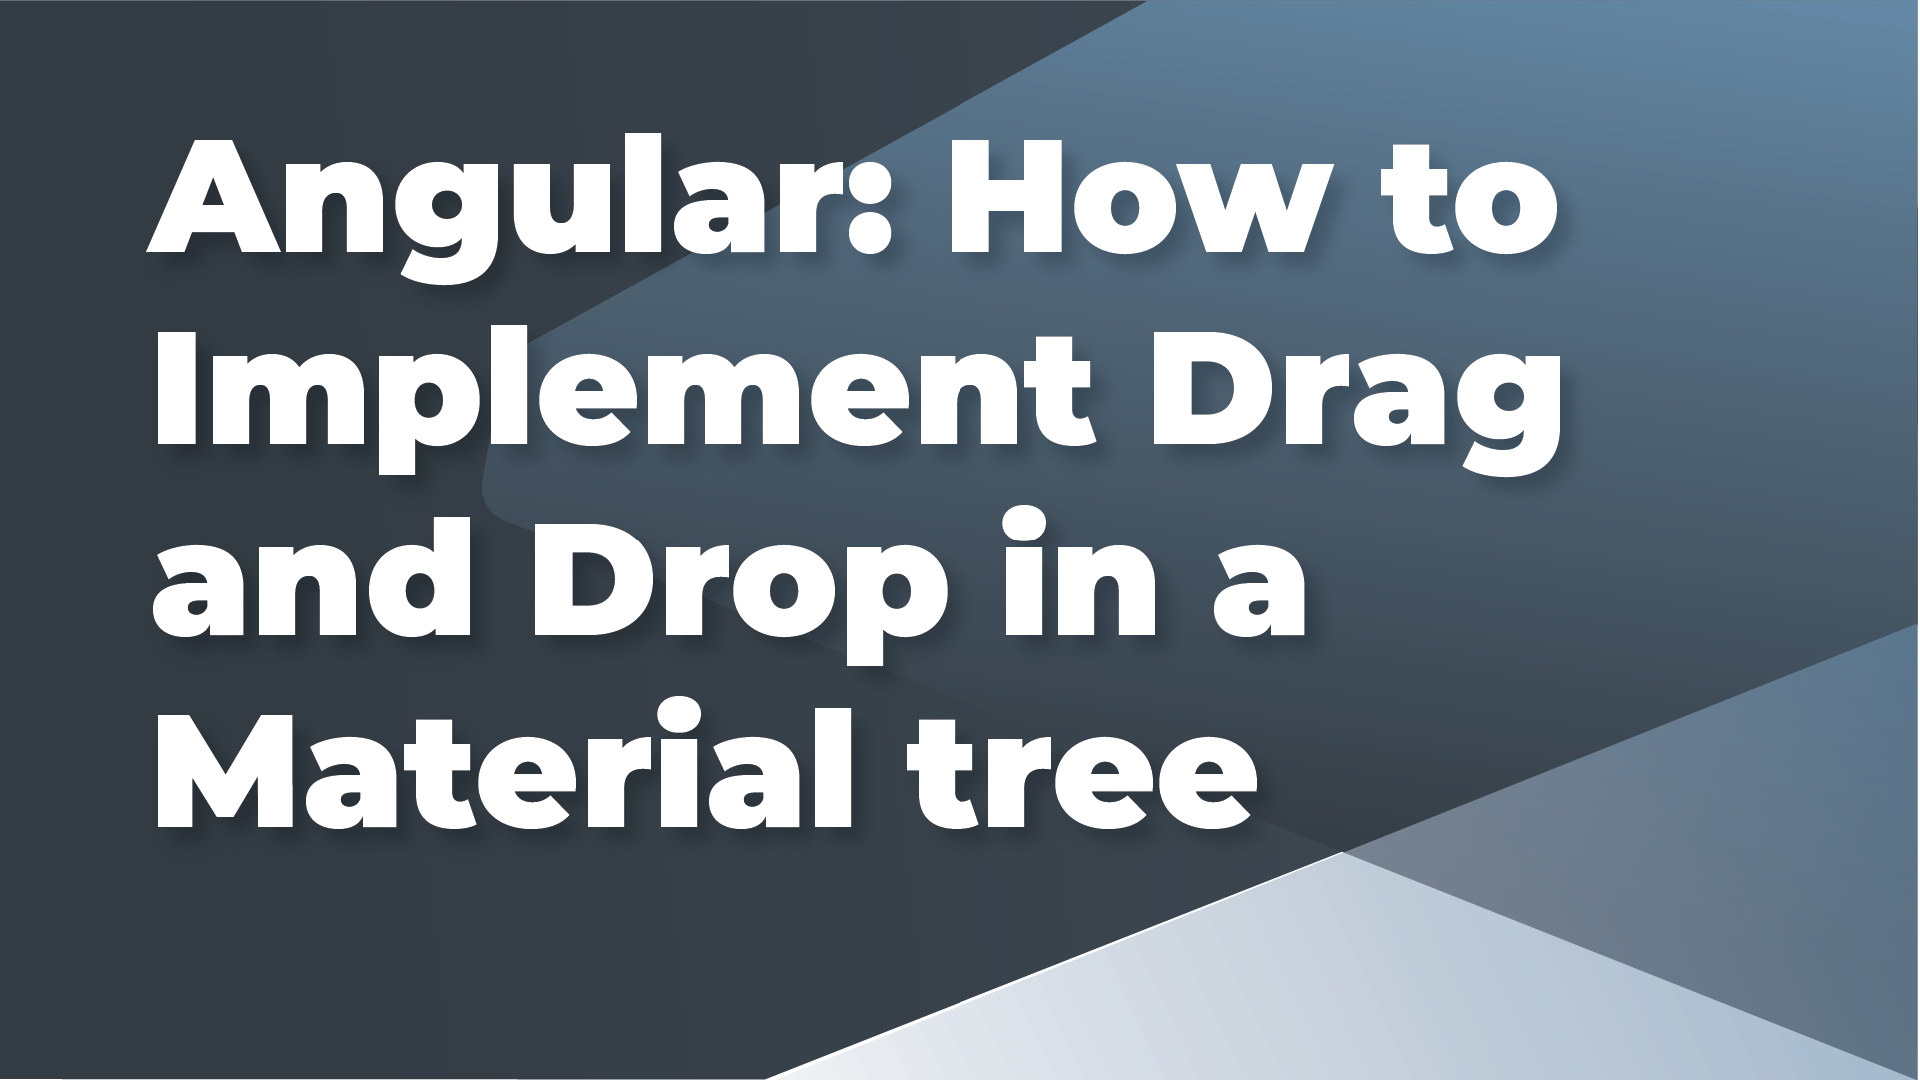 Geneeskunde binnenvallen chaos Angular: How to Implement Drag and Drop in a Material tree